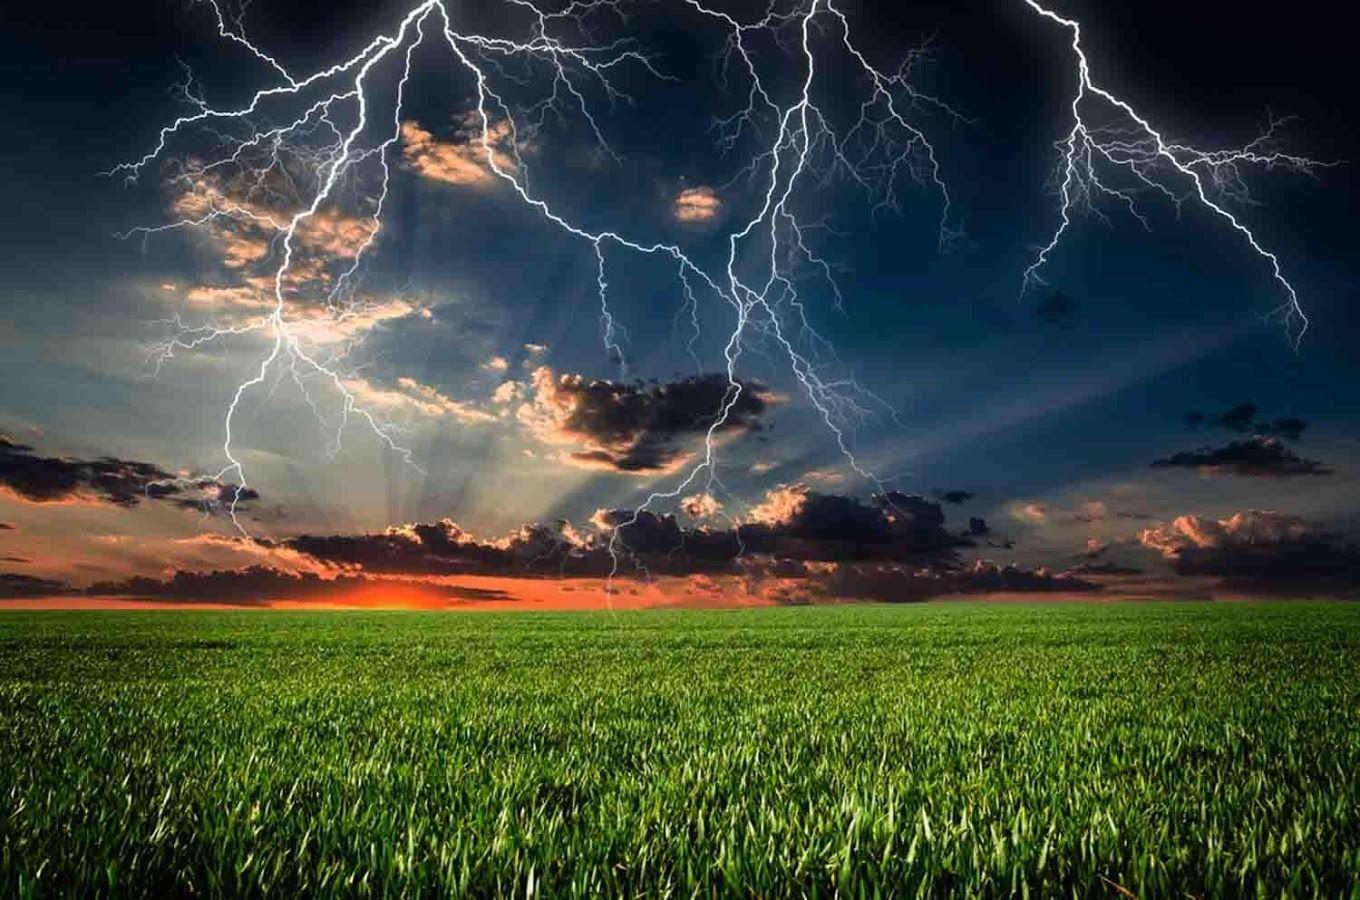 Thunderstorm Wallpaper, HD Image Thunderstorm Collection